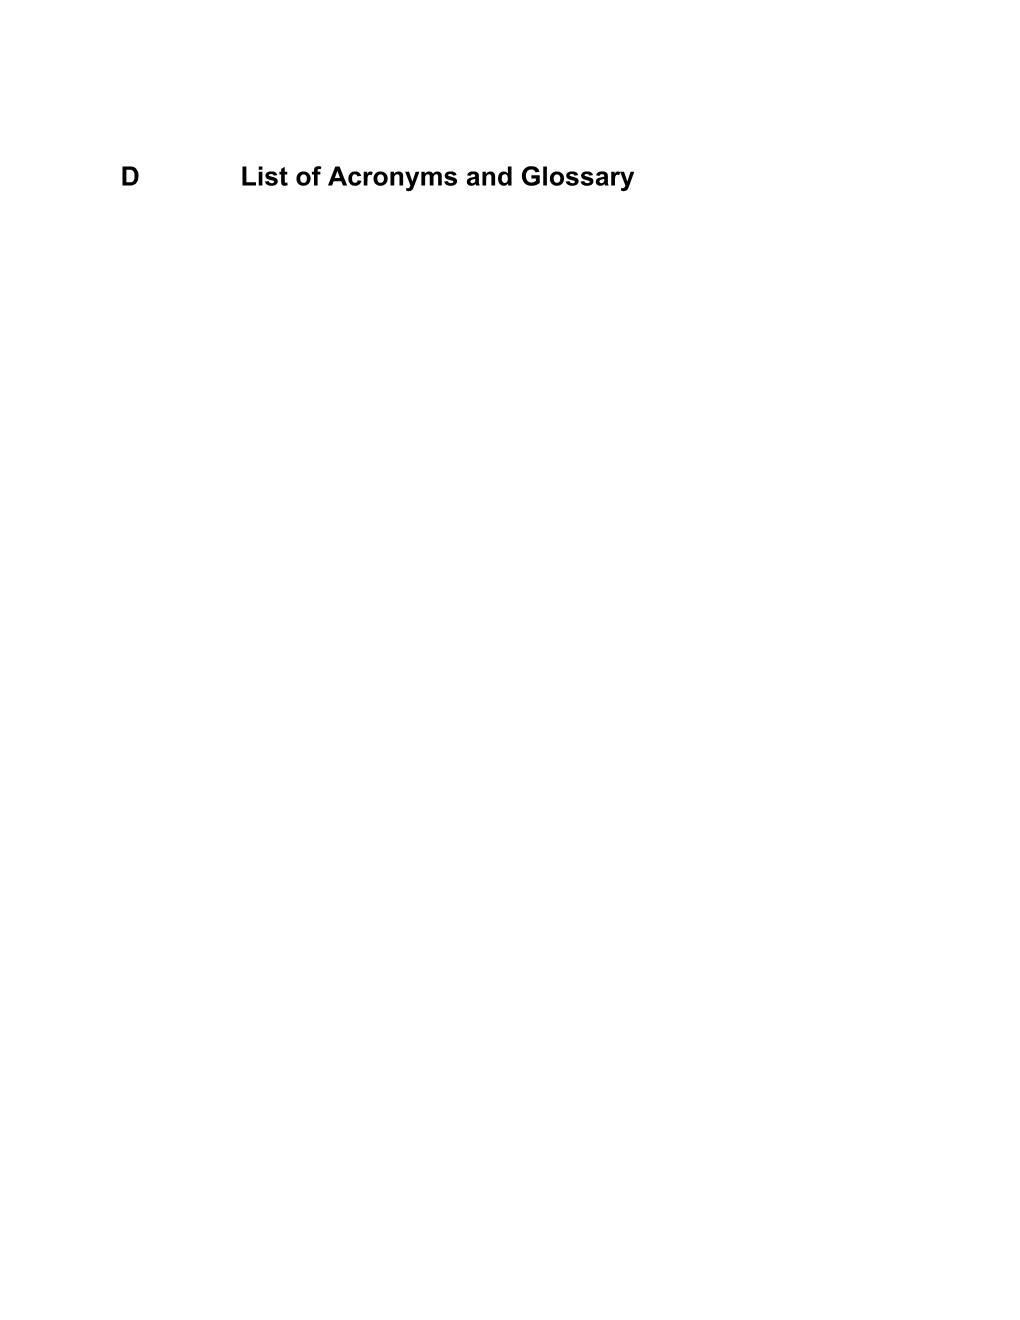 D List of Acronyms and Glossary